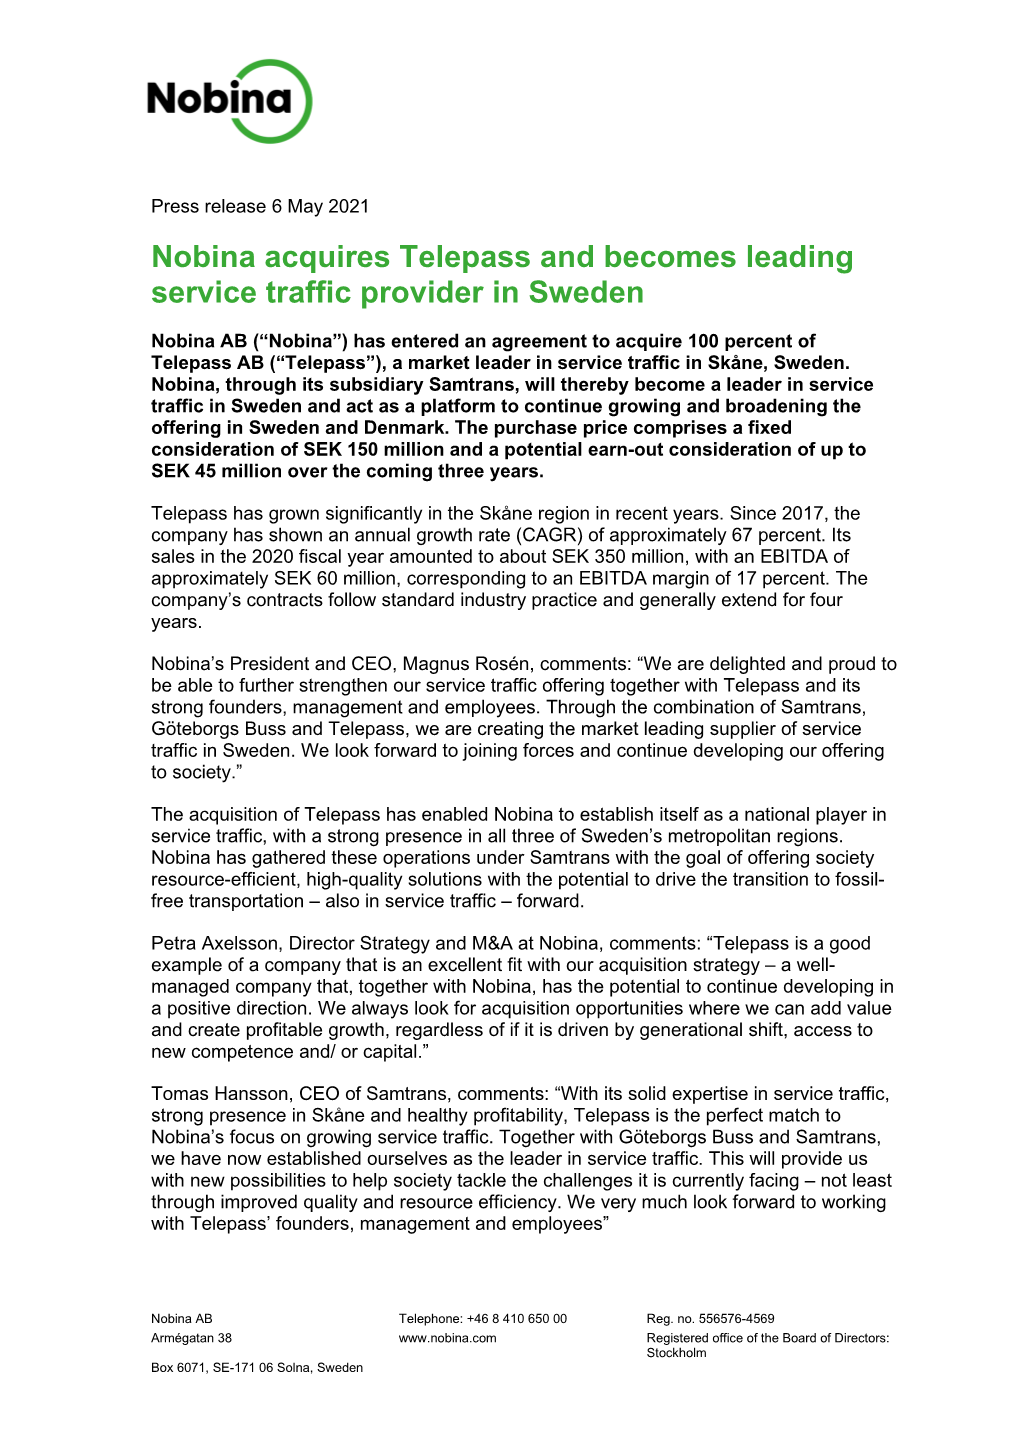 Nobina Acquires Telepass and Becomes Leading Service Traffic Provider in Sweden